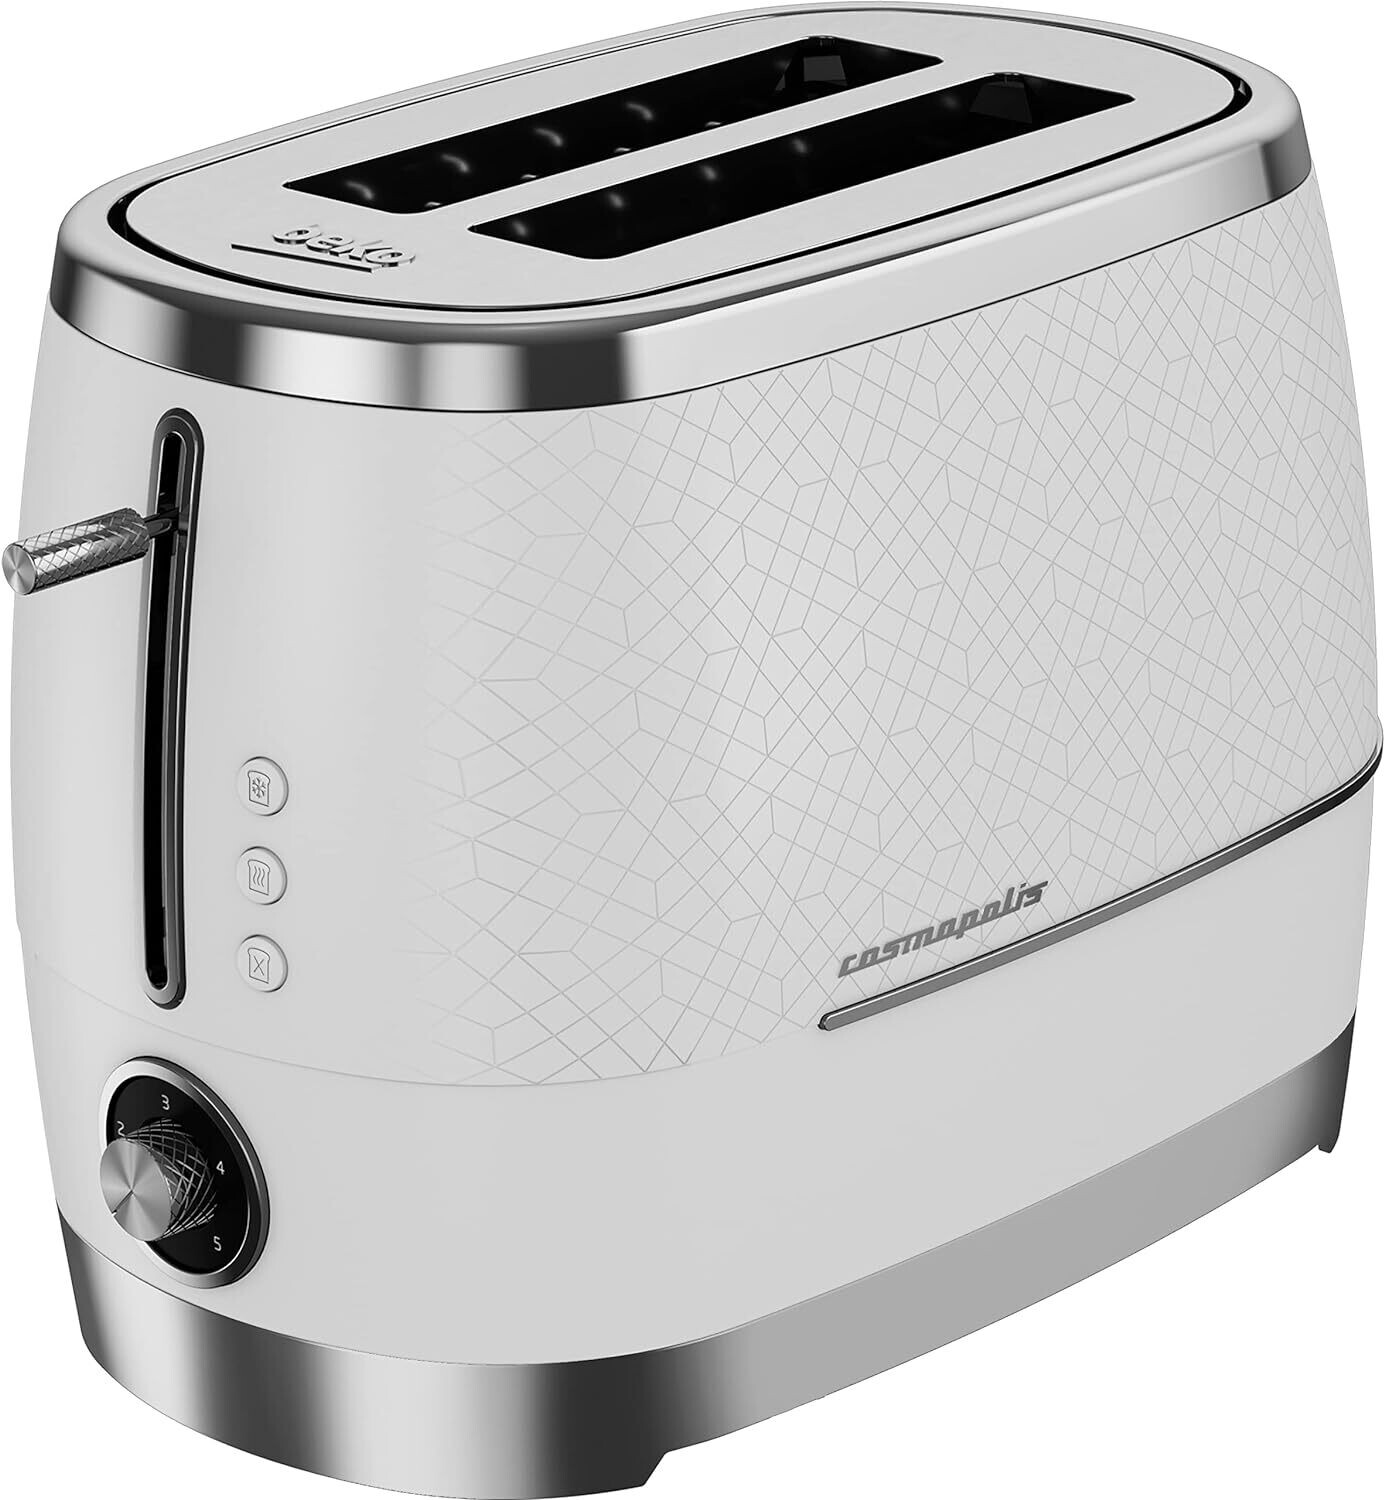 BEKO Cosmopolis Toaster TAM8202CR - White Chrome Design, Extra Wide Slot 2-Slice with Defrost, Reheat, and Cancel Functions